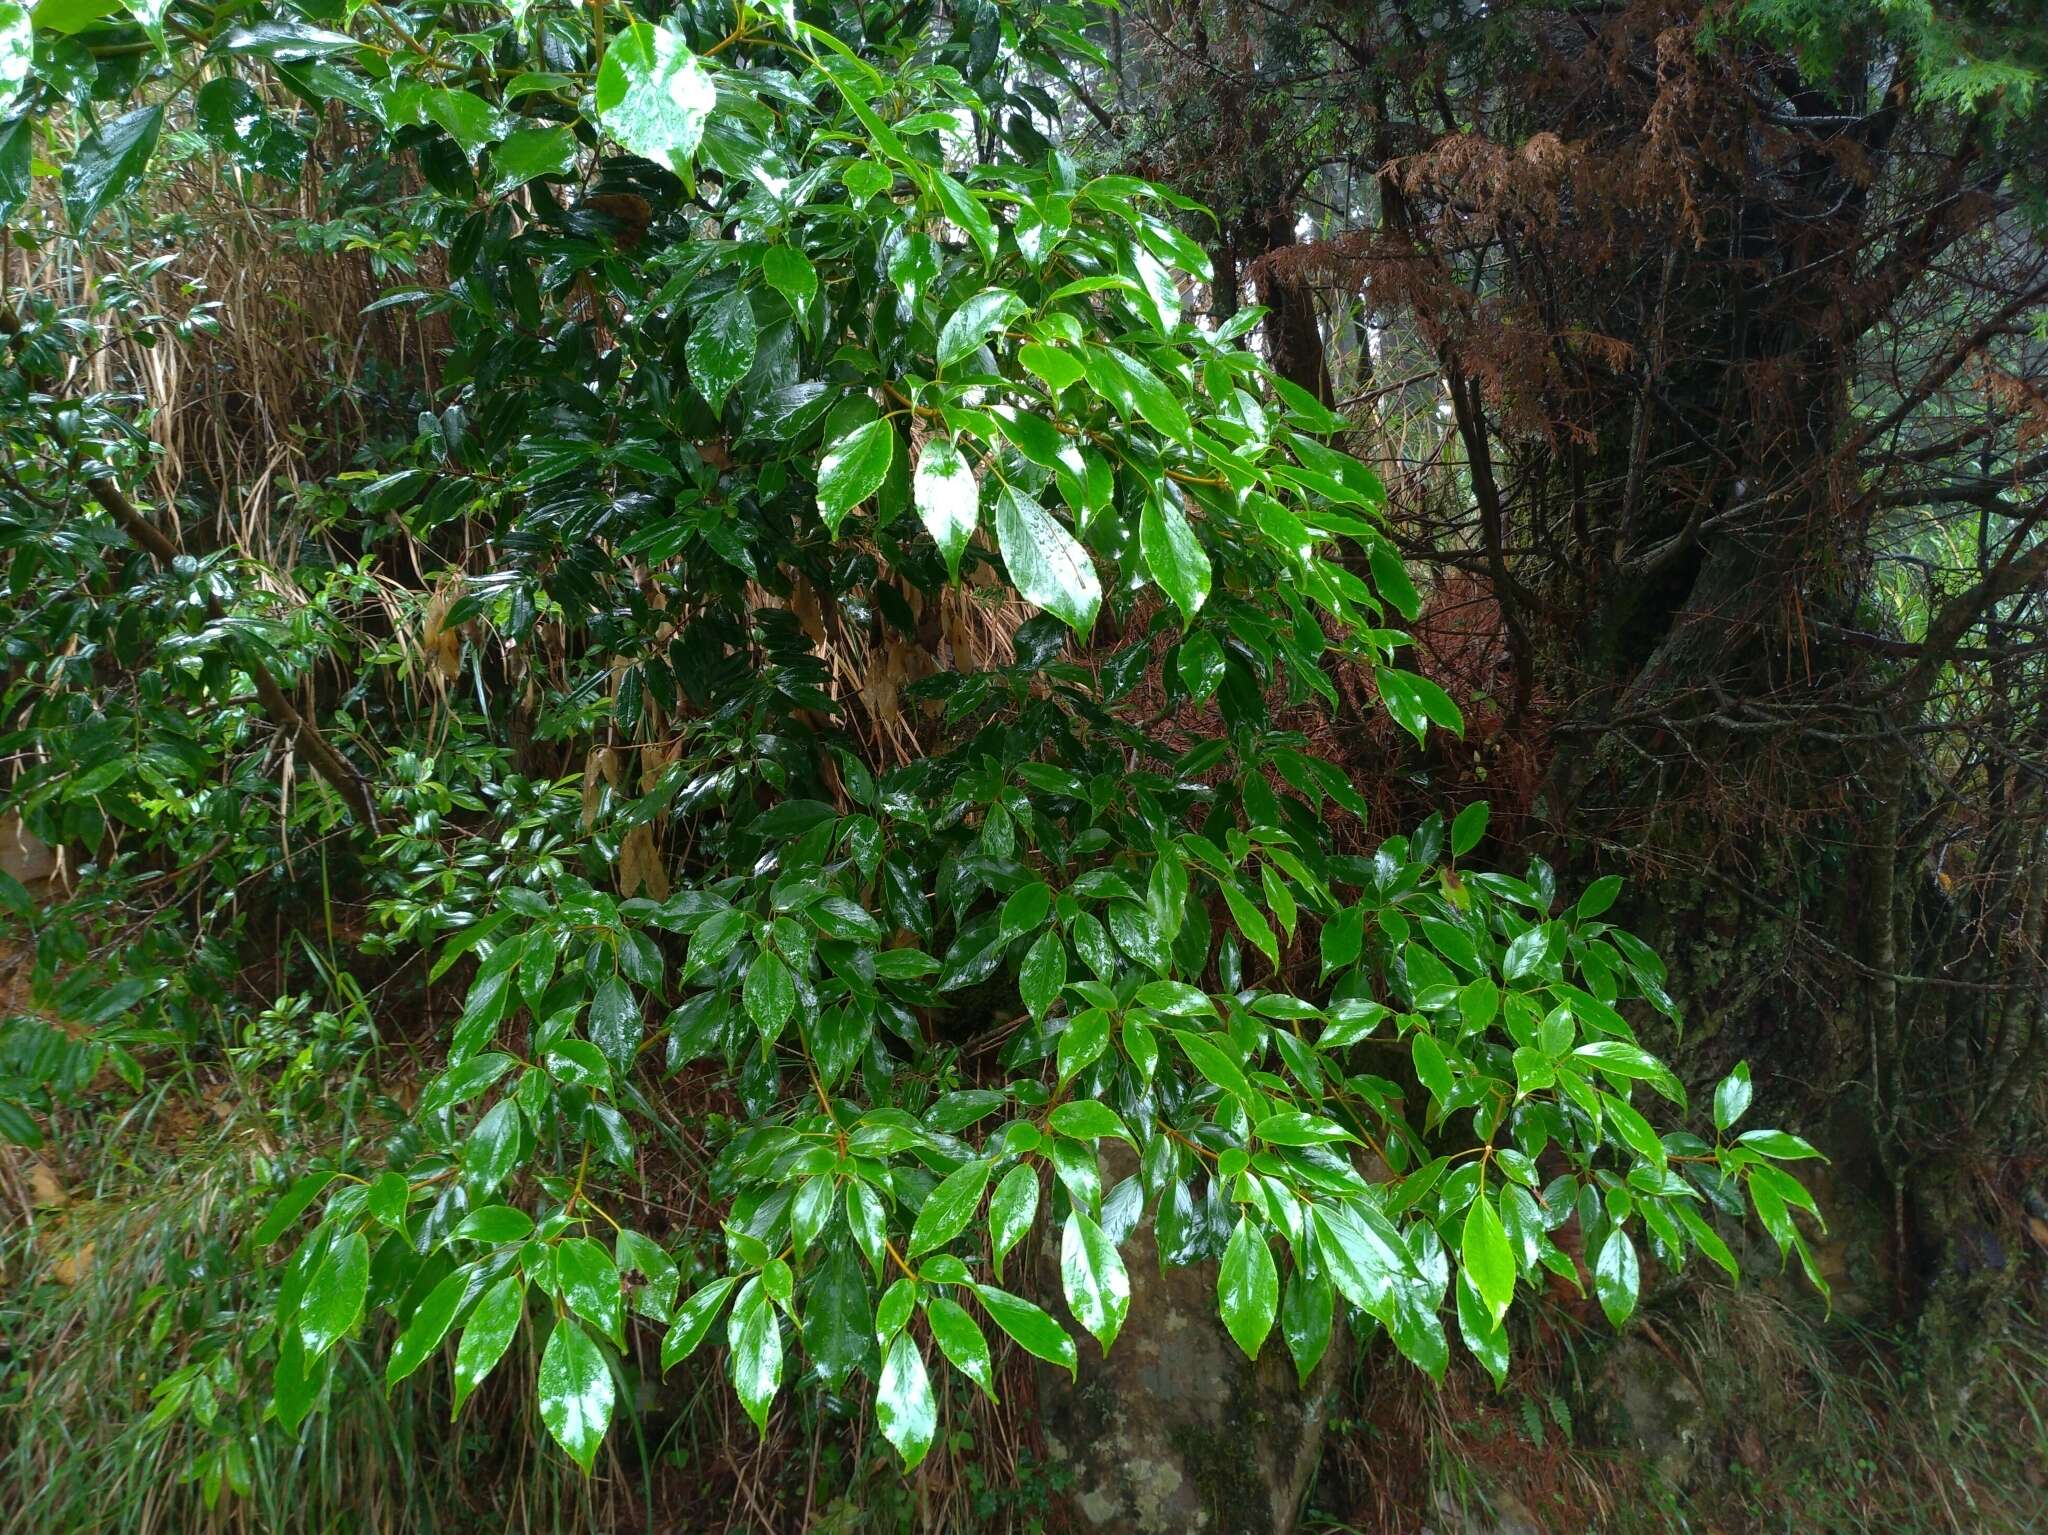 Image of Trochodendron